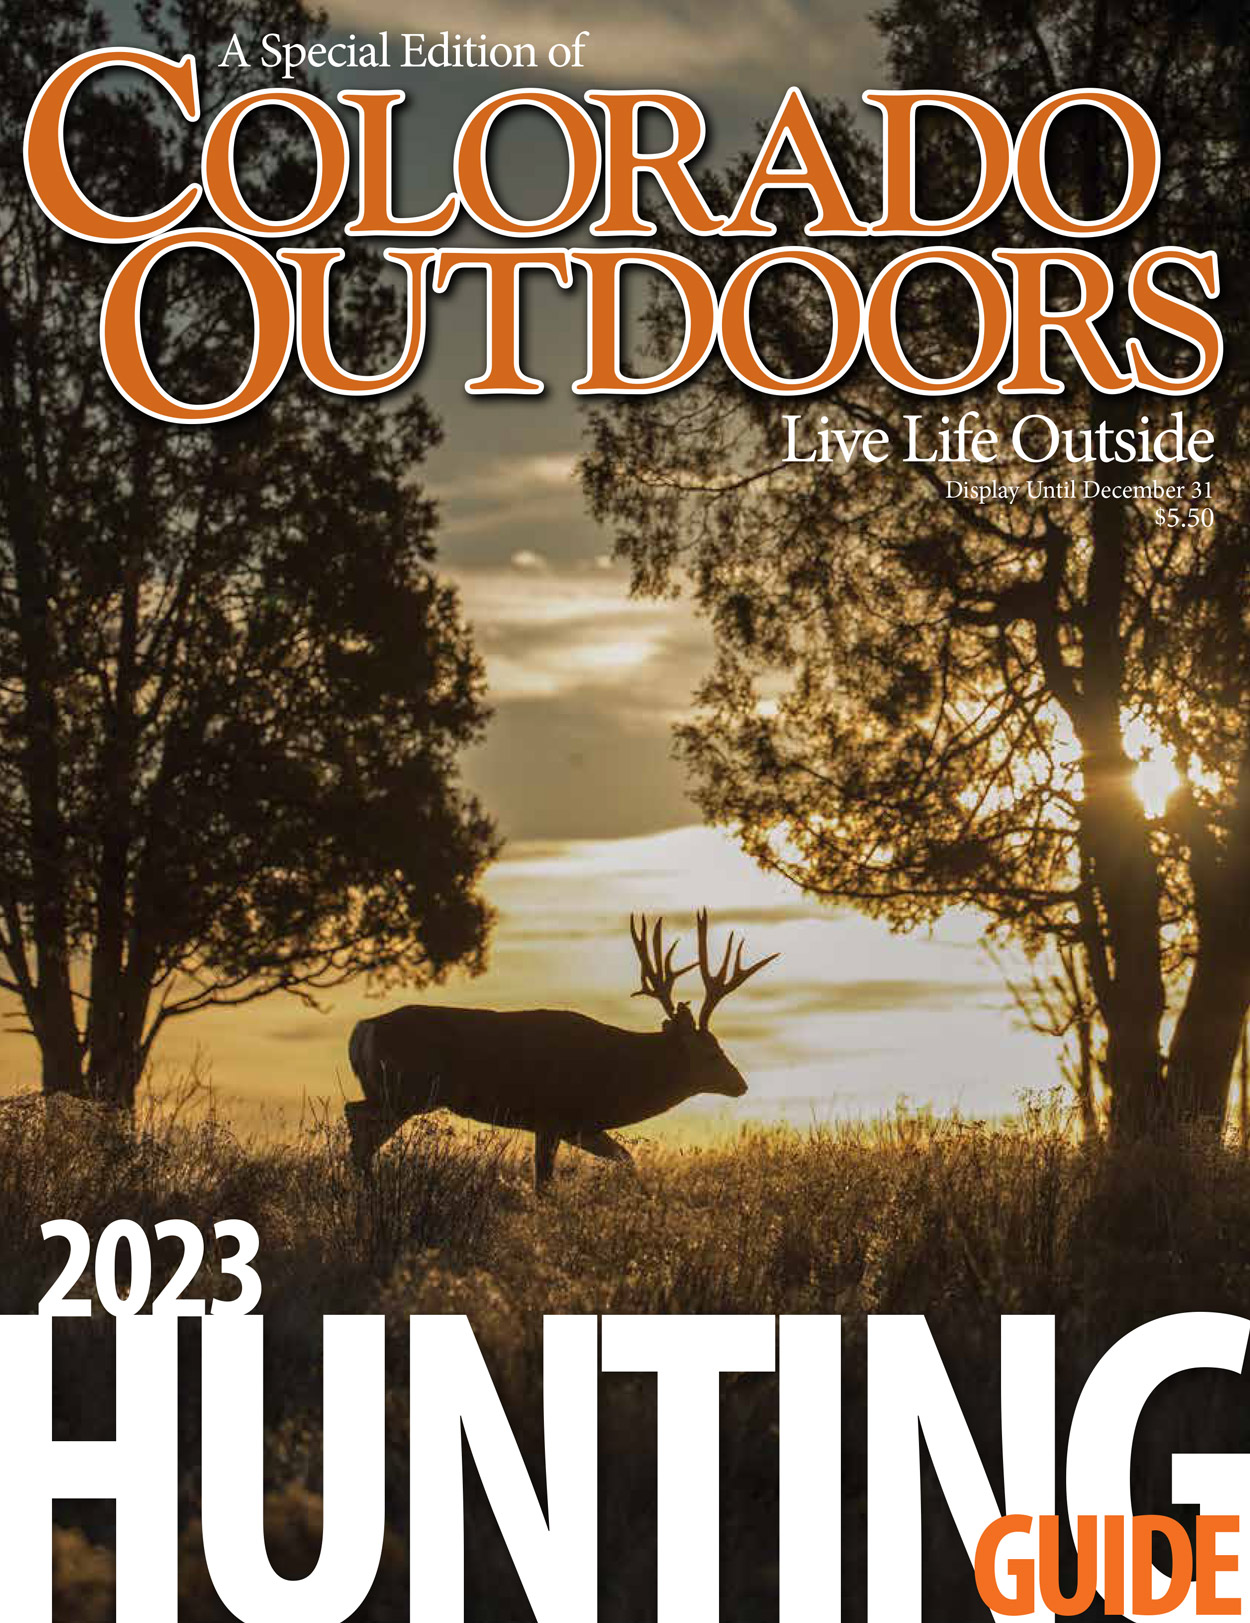 Colorado Outdoors Hunting Guide